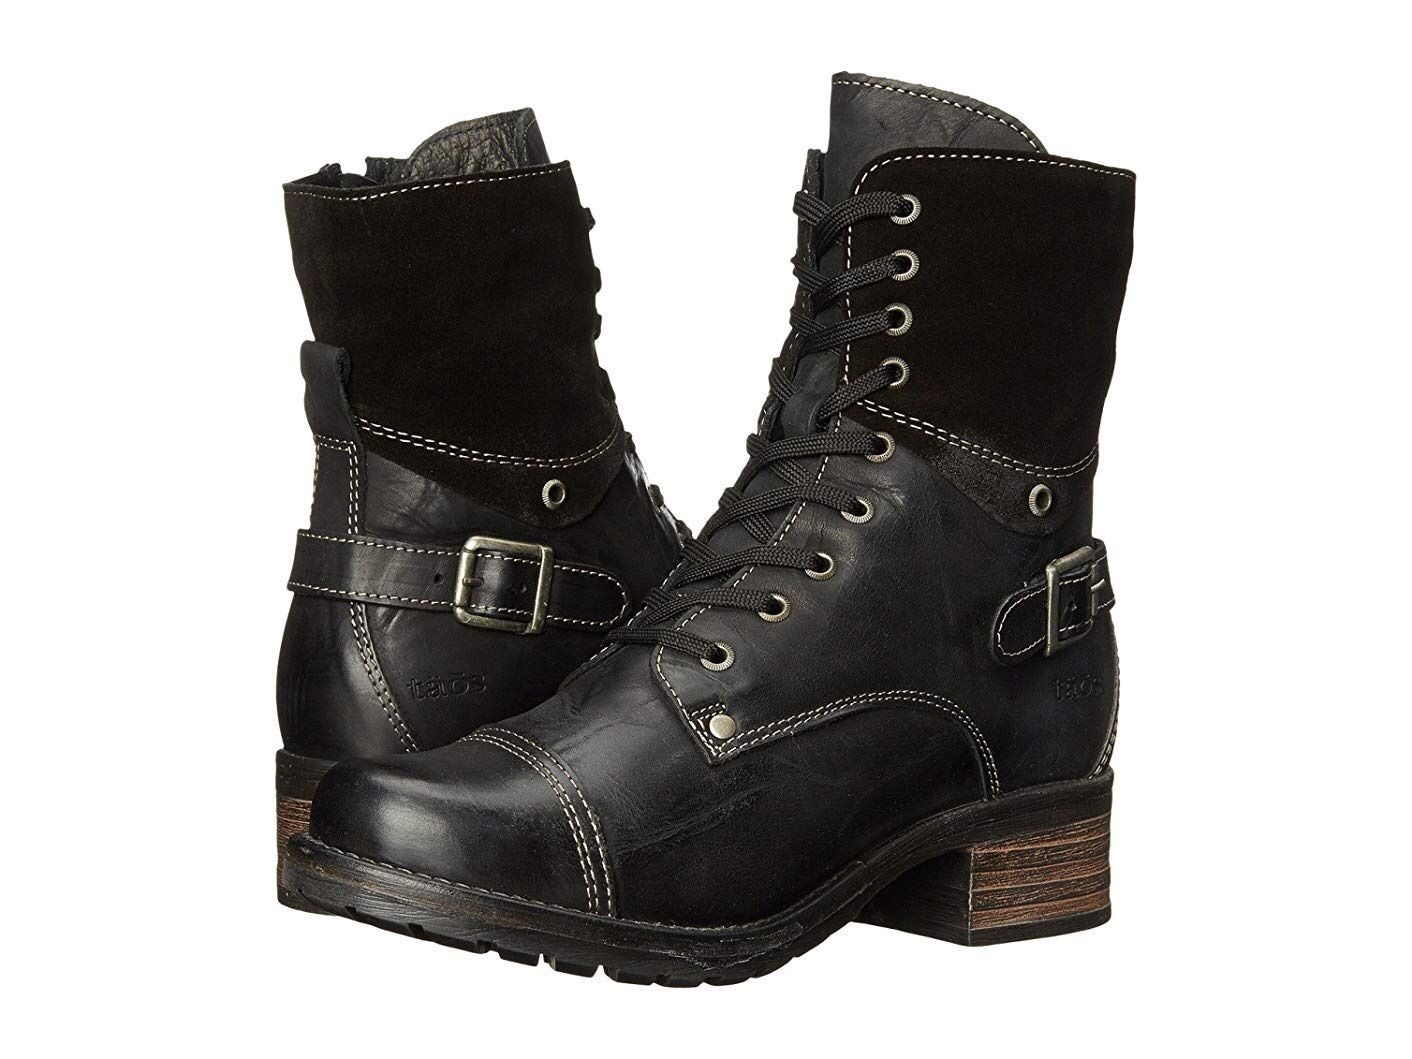 The combat boot trend - Are you a fan? - Page 4 - Blogs & Forums